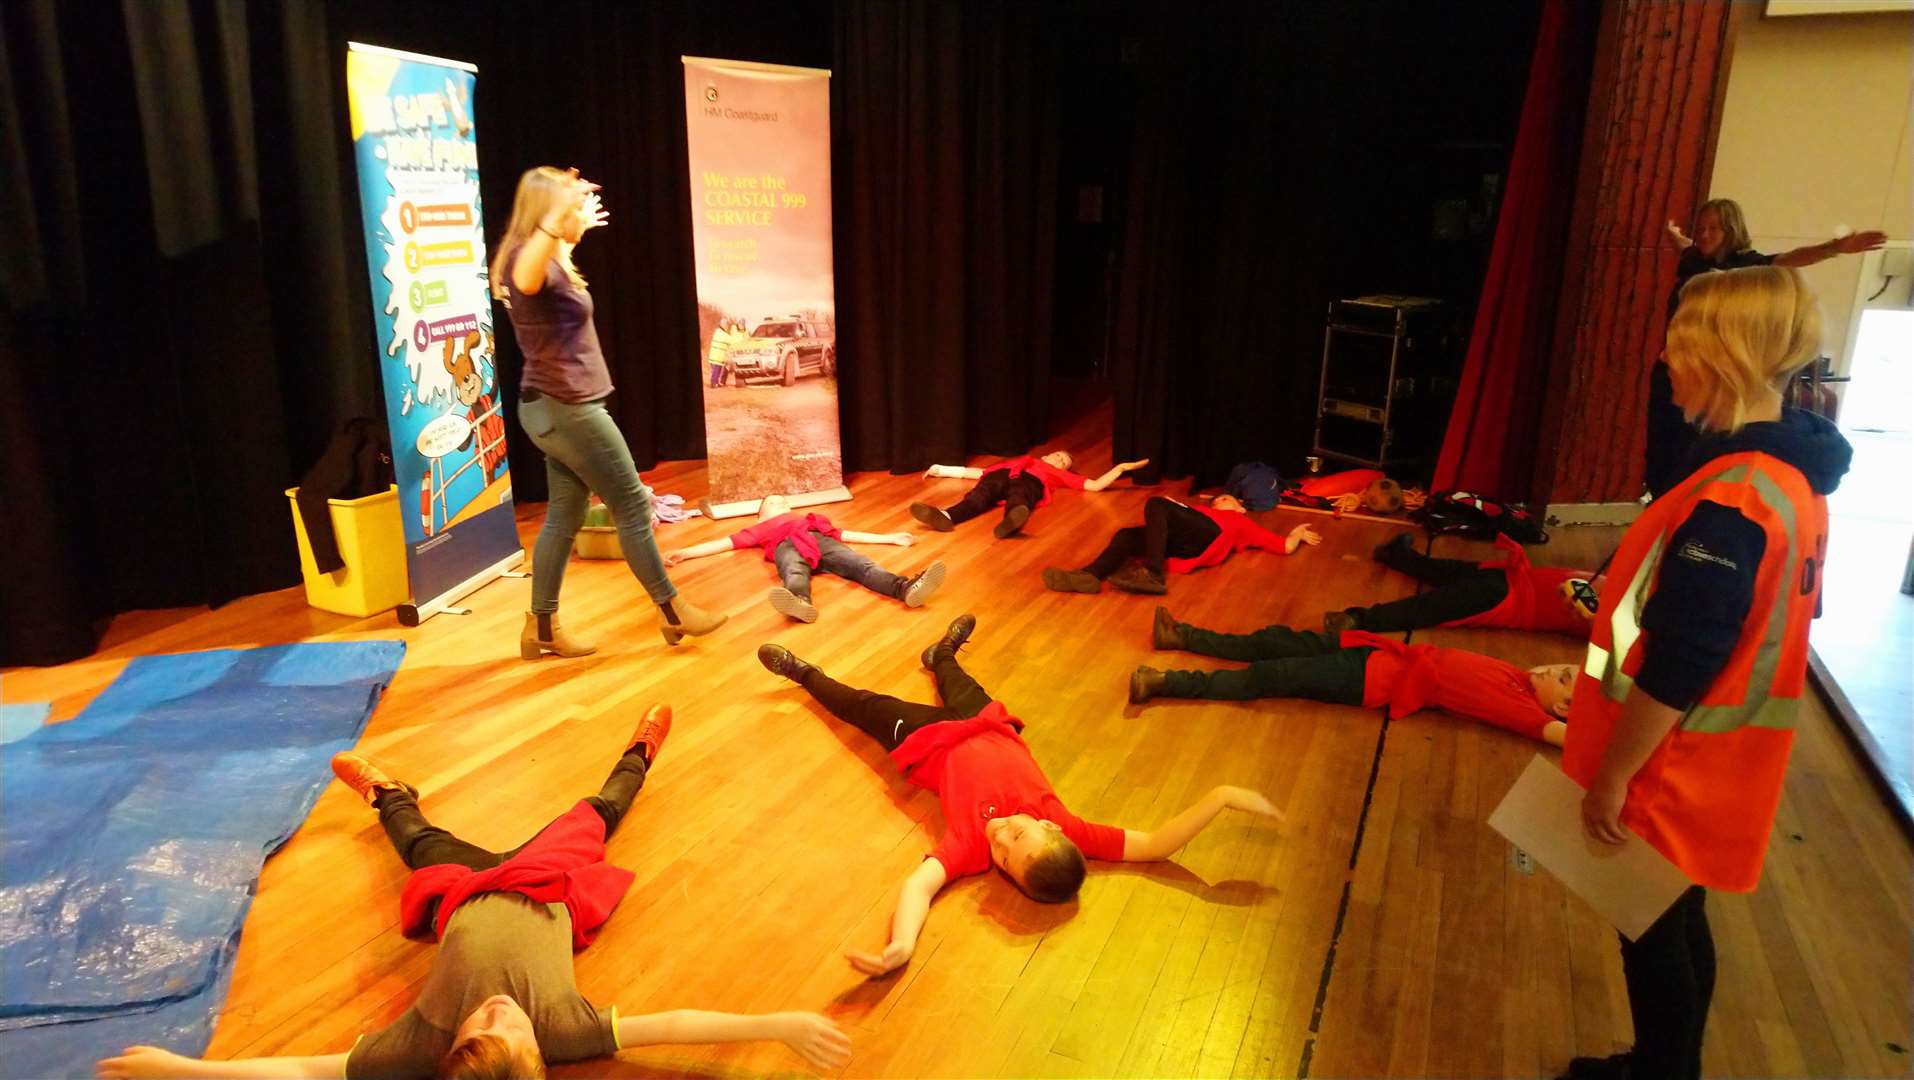 RNLI education manager Laura Erskine teaches P7s how to float and remain calm should they fall into water.